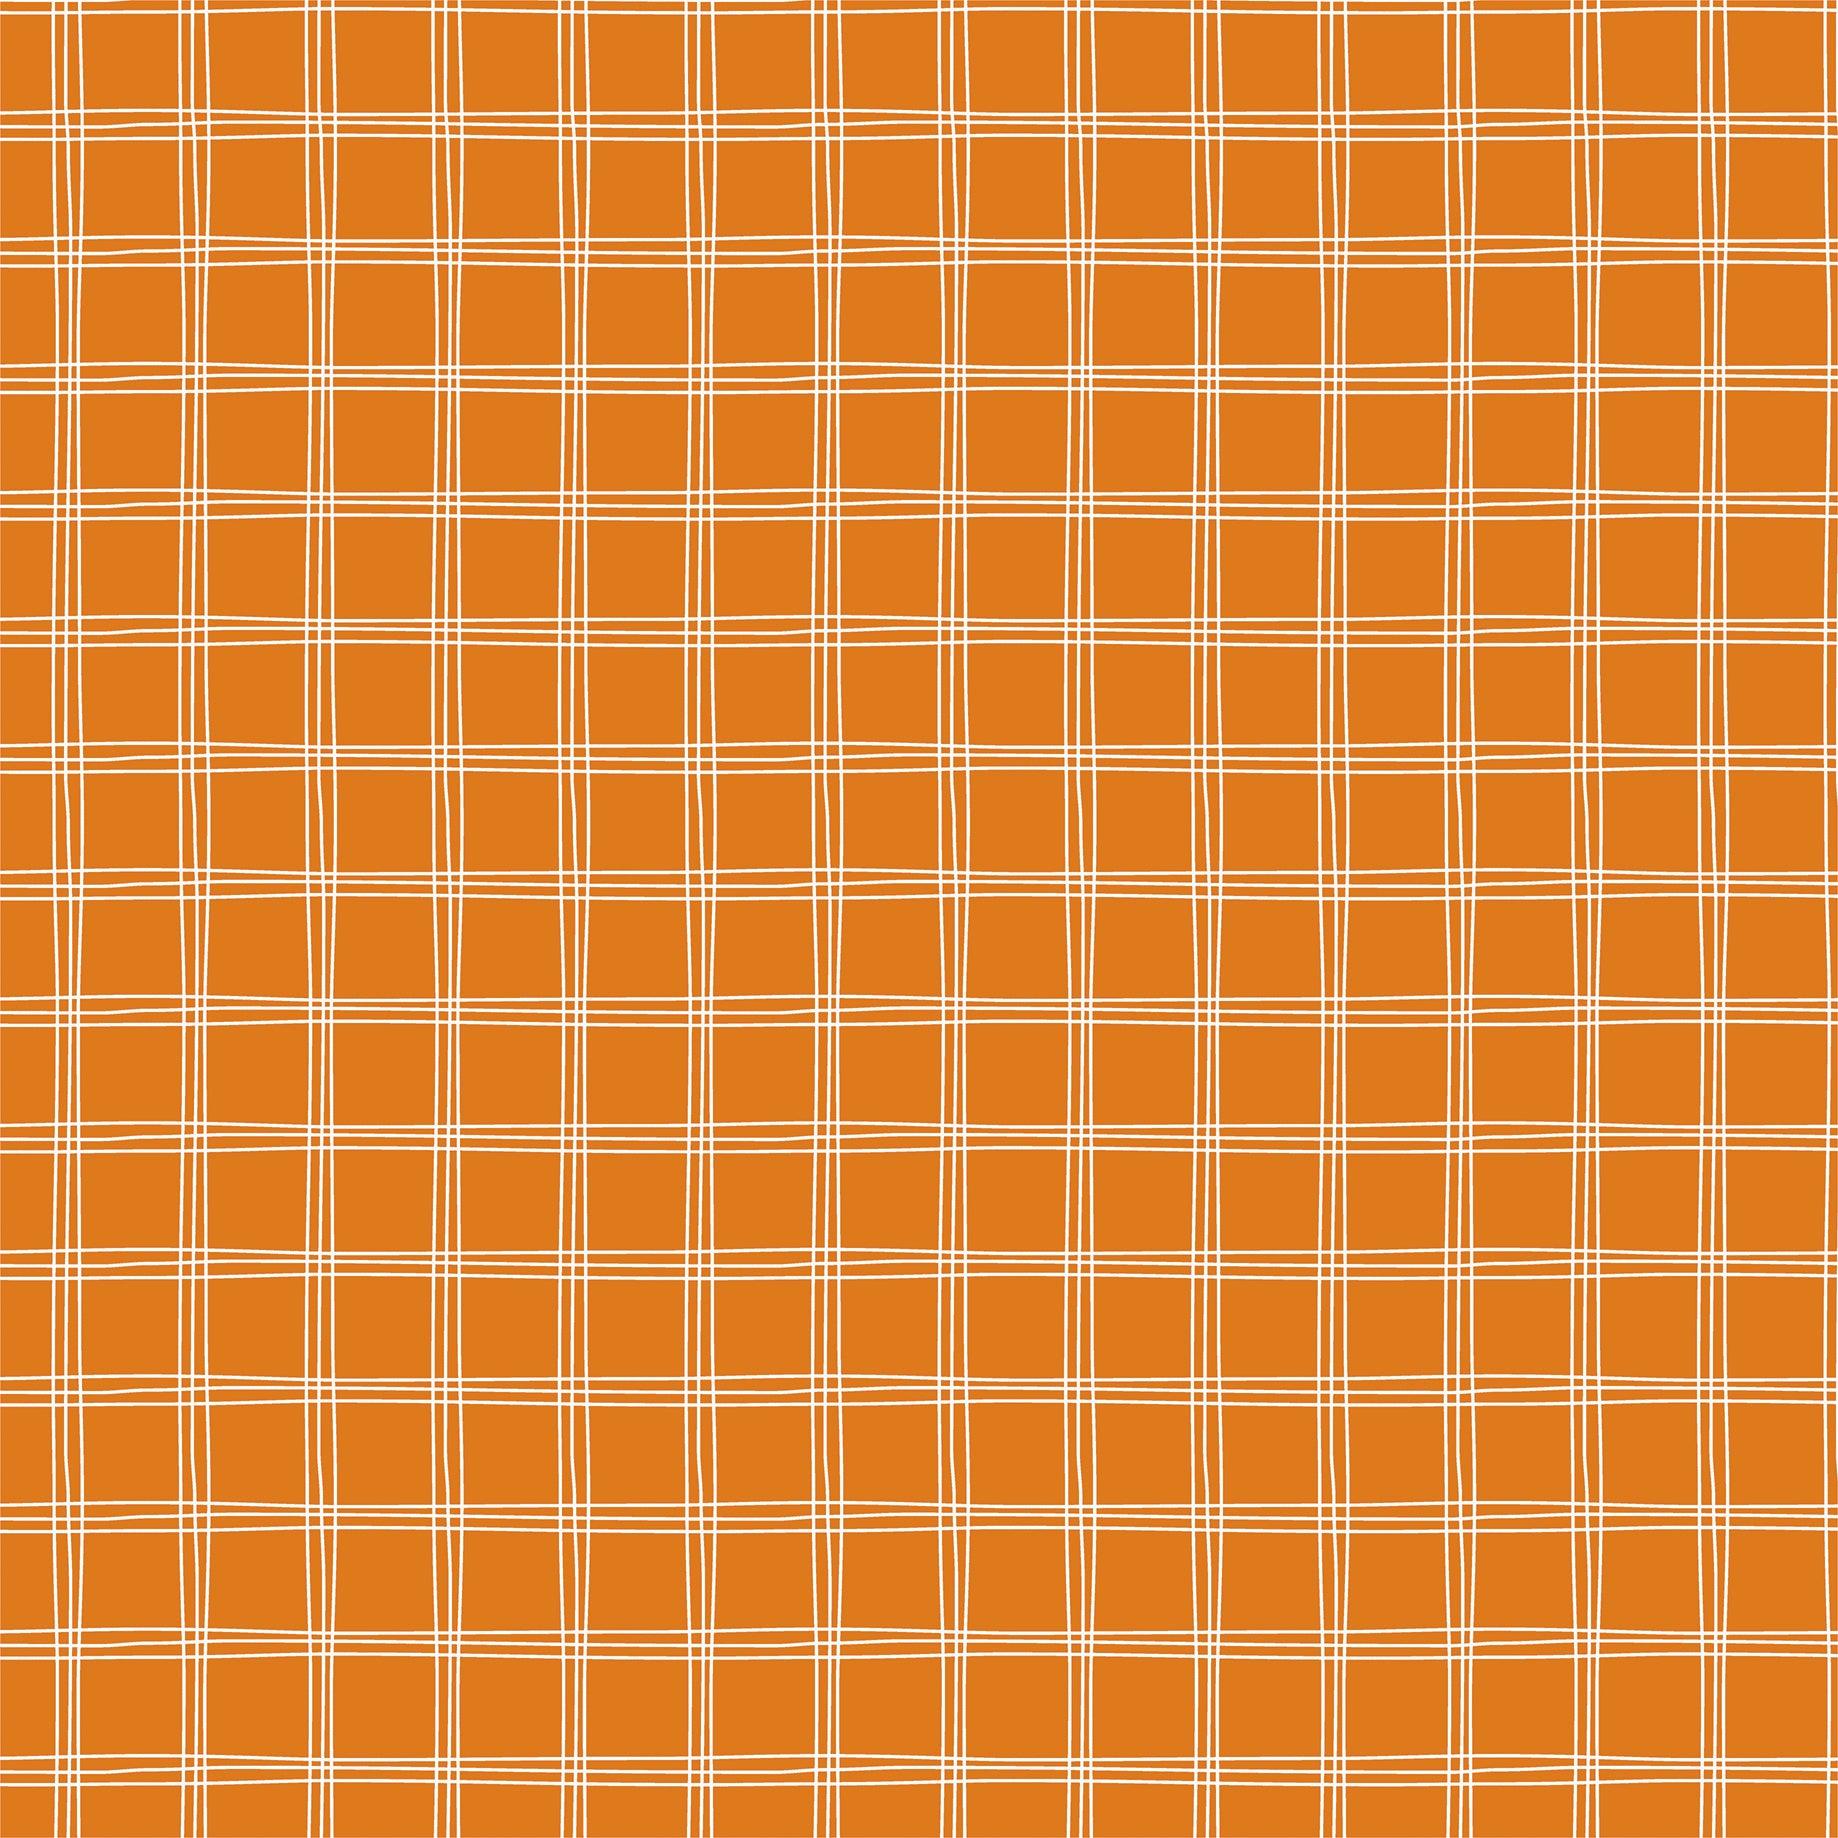 Fall Fever Collection Falling For Fall 12 x 12 Double-Sided Scrapbook Paper by Echo Park Paper - Scrapbook Supply Companies